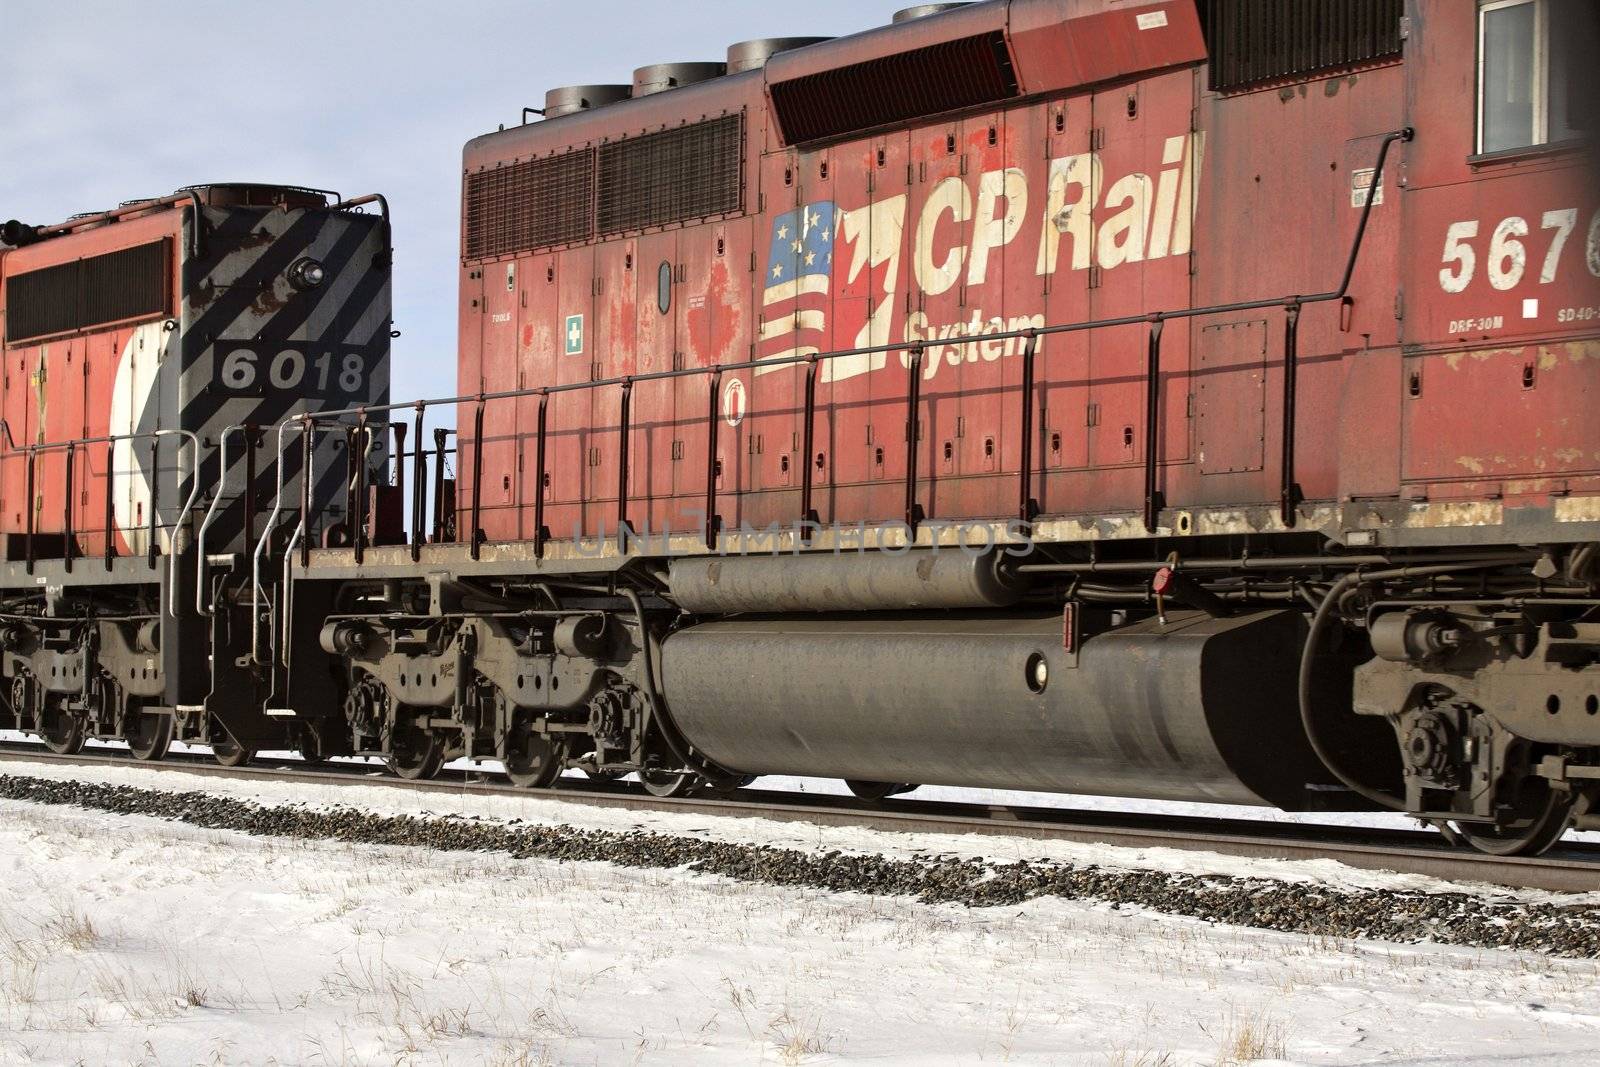 Canadian Pacific Railway CPR is a transcontinental railway, and transportation system, that operates from Montreal to Vancouver and extends into the United States.